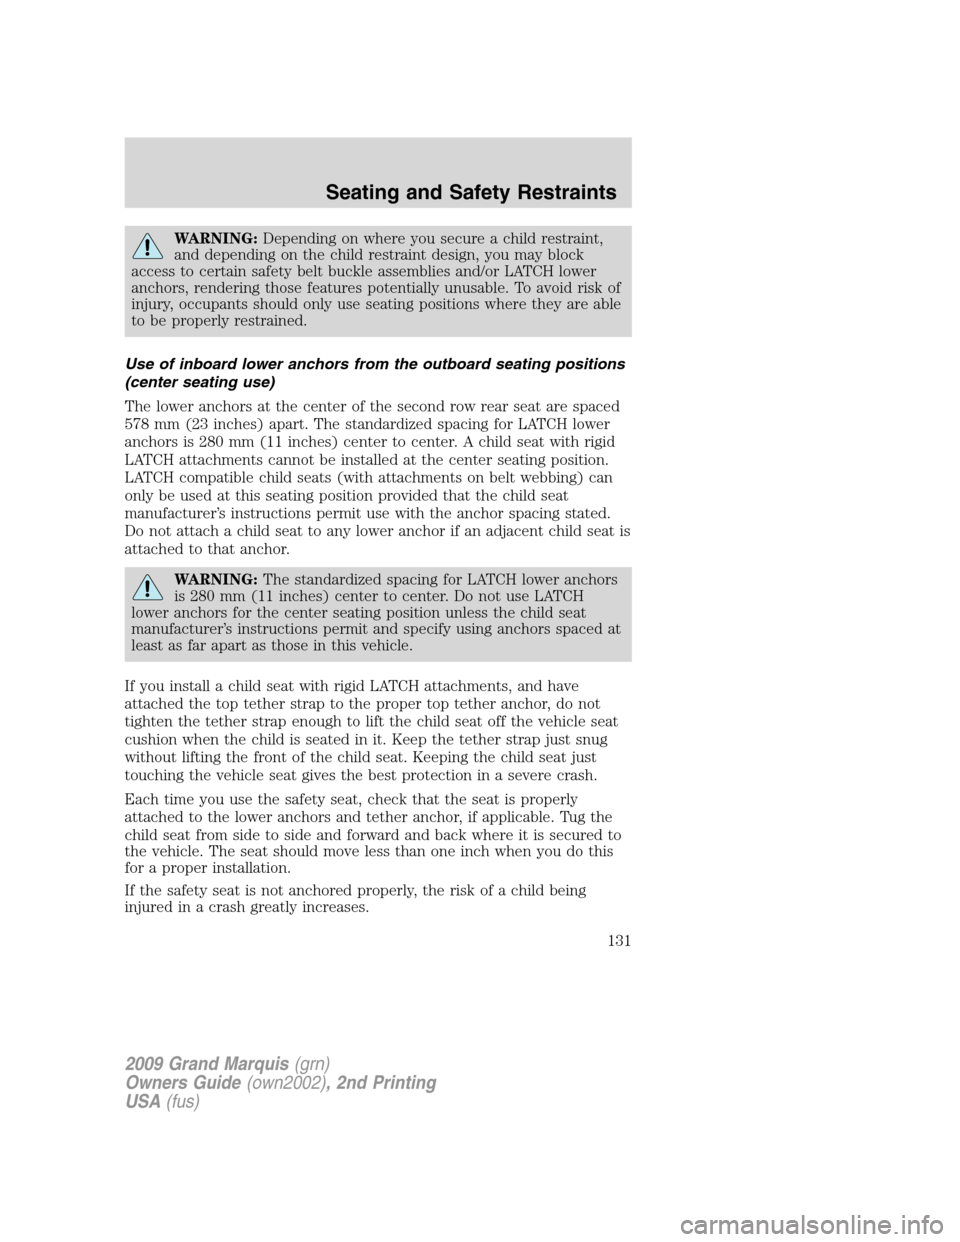 Mercury Grand Marquis 2009  s Repair Manual WARNING:Depending on where you secure a child restraint,
and depending on the child restraint design, you may block
access to certain safety belt buckle assemblies and/or LATCH lower
anchors, renderin